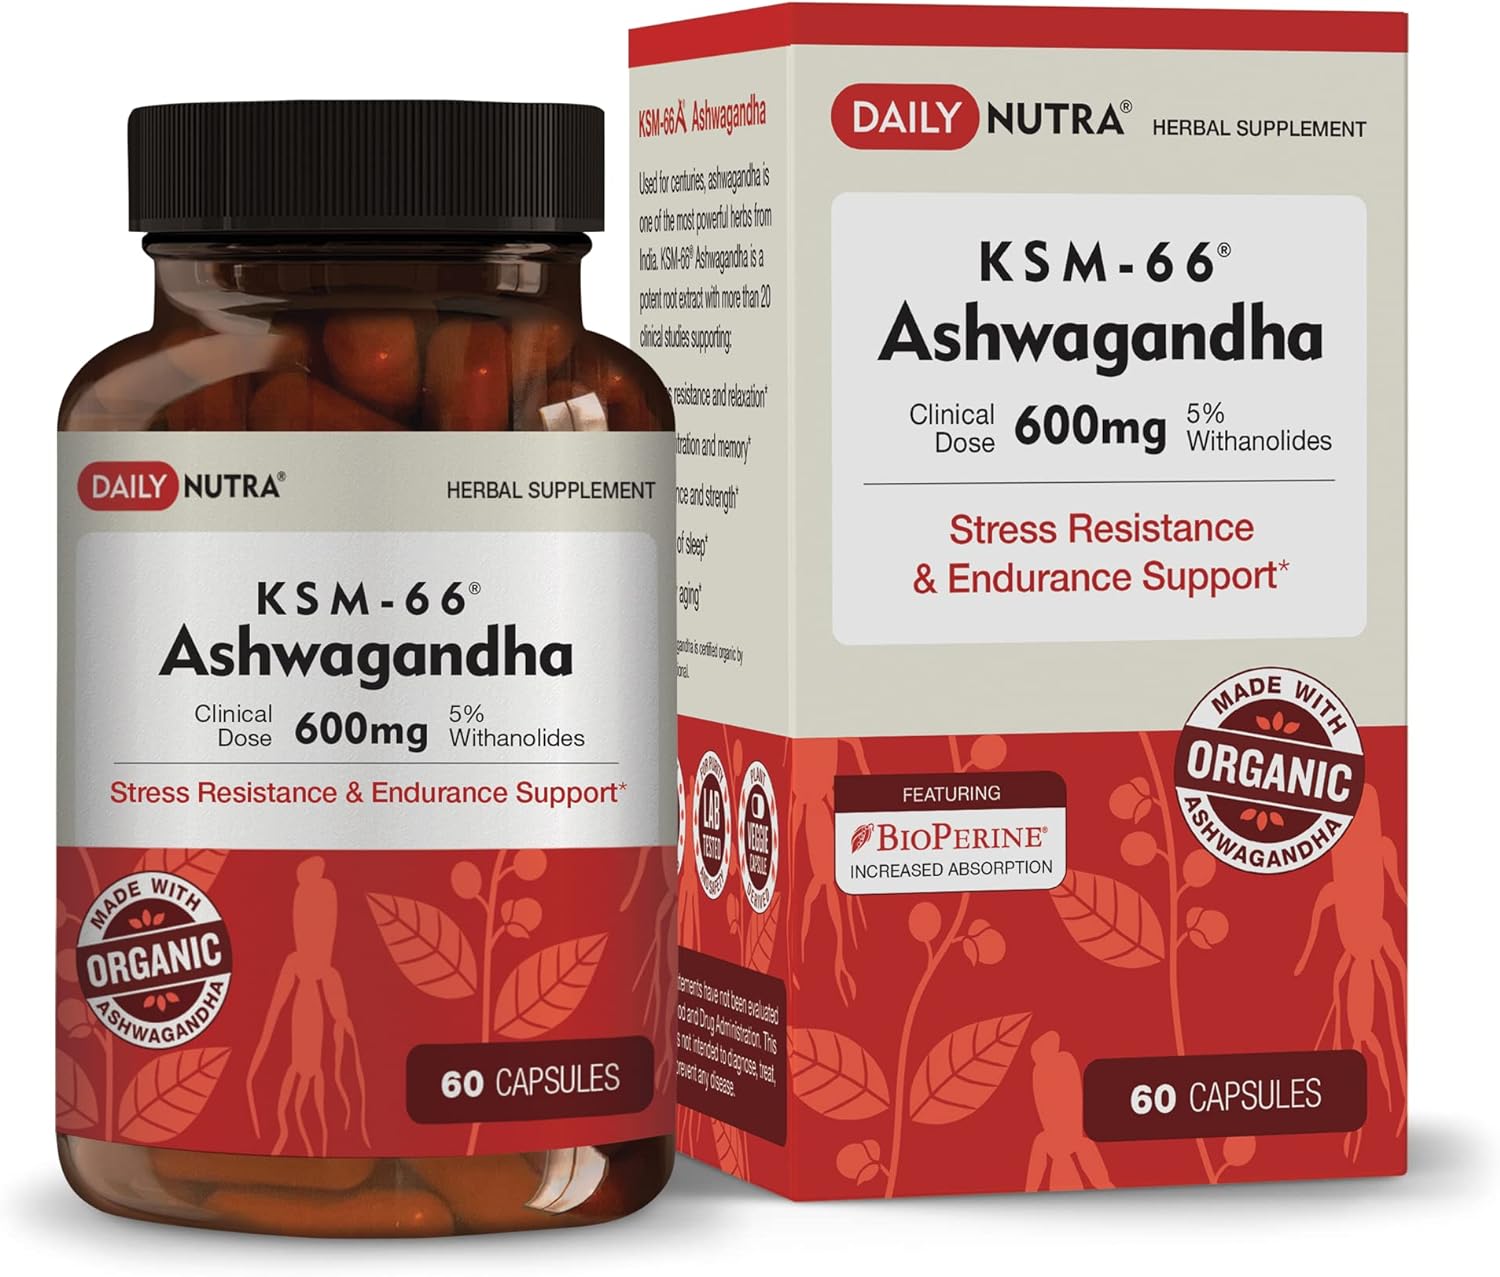 DailyNutra KSM-66 Ashwagandha 600mg Organic Root Extract - High Potency Supplement with 5% Withanolides | Relieves Tiredness, Supports Relaxation, Focus, Energy, & Muscle Growth (60 Capsules)